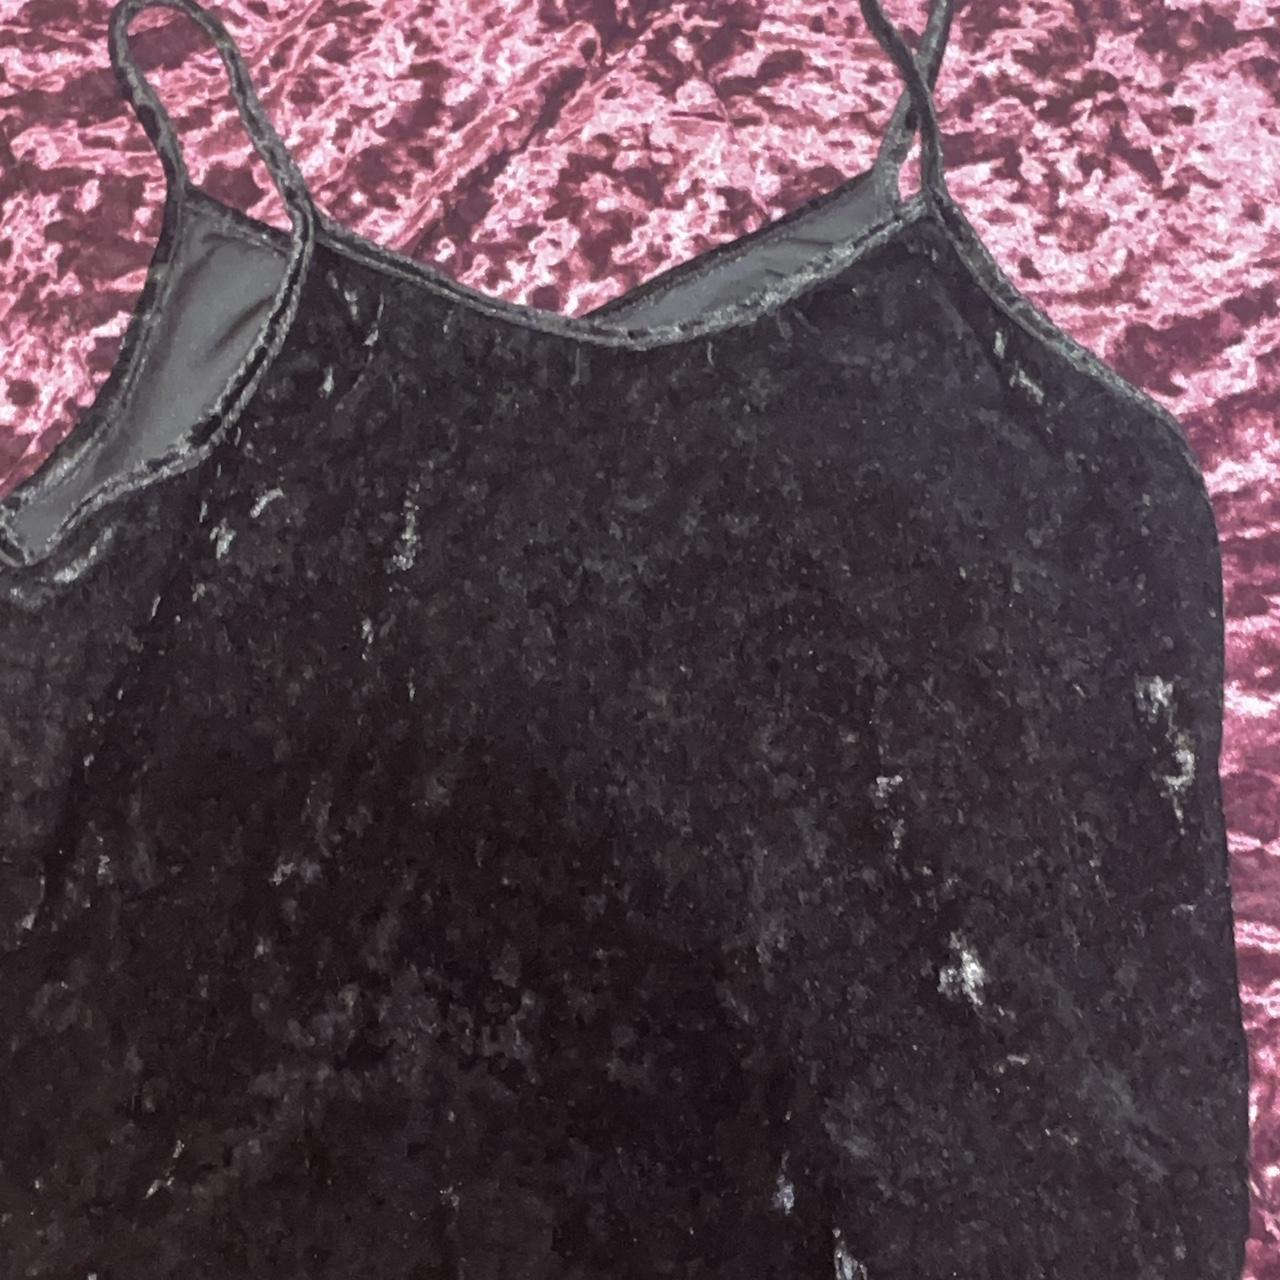 Black velvety camisole. Size small but could fit a - Depop